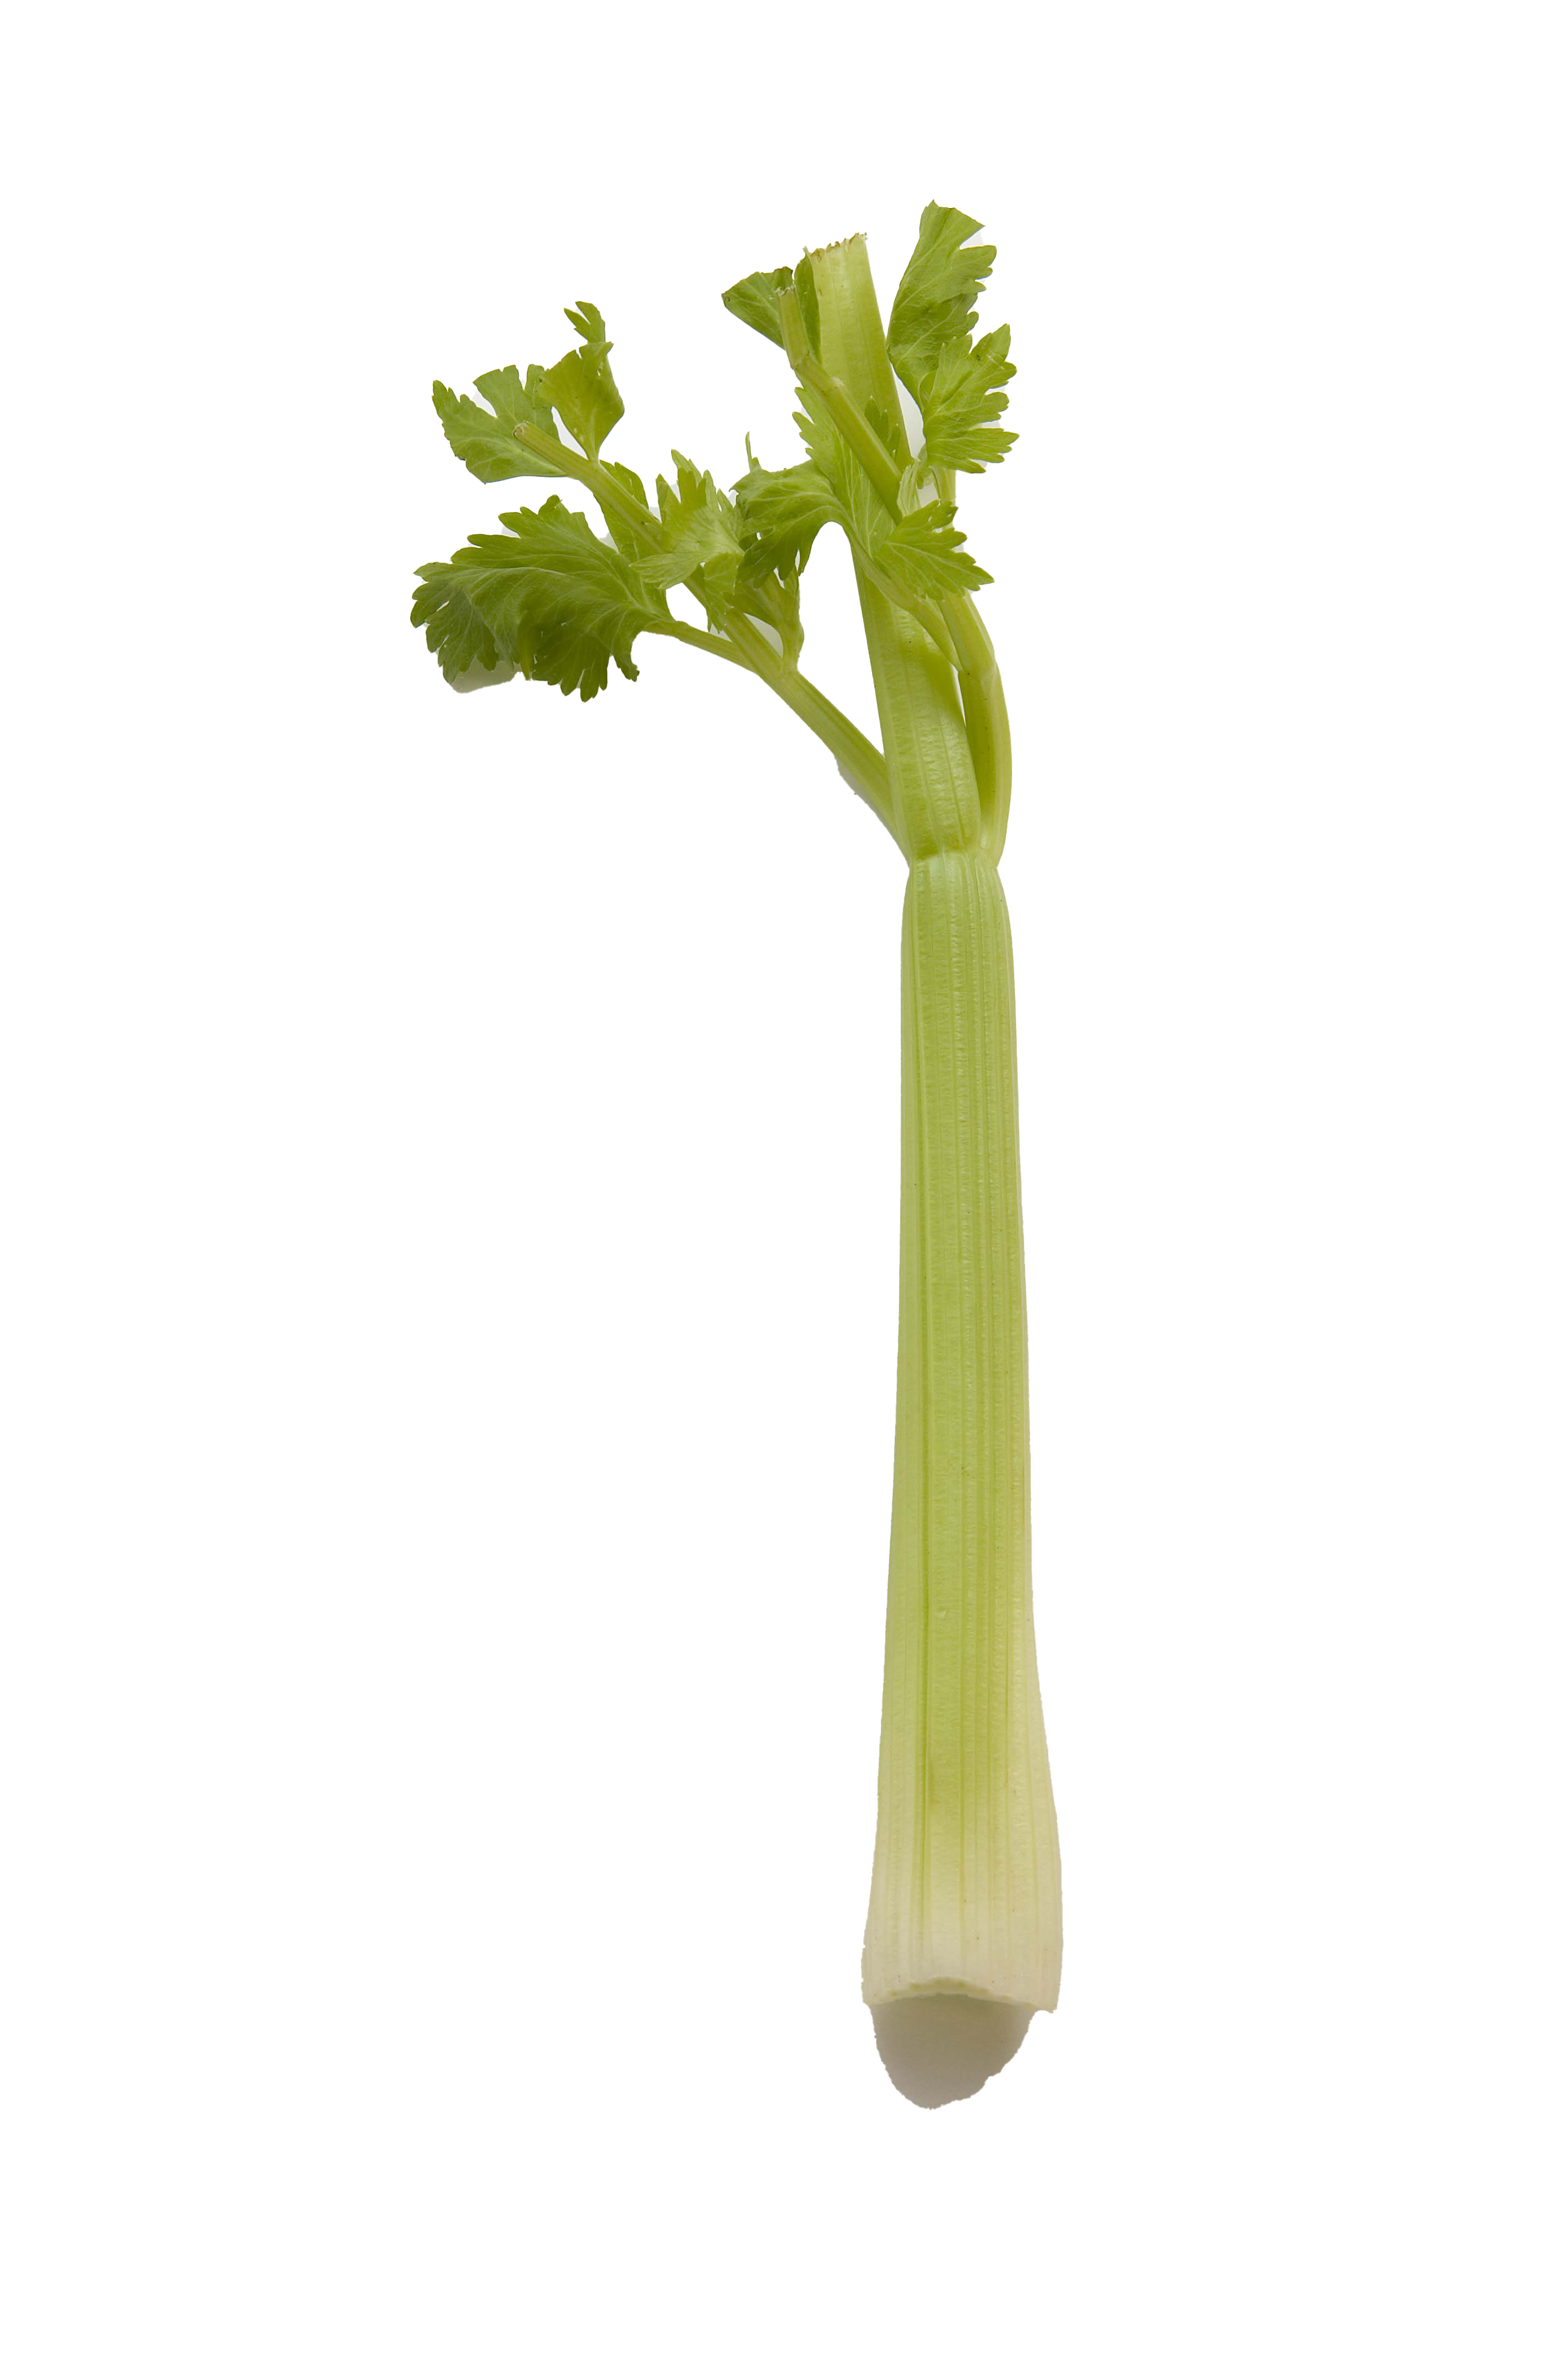 Vegetable Celery PNG High-Quality Image